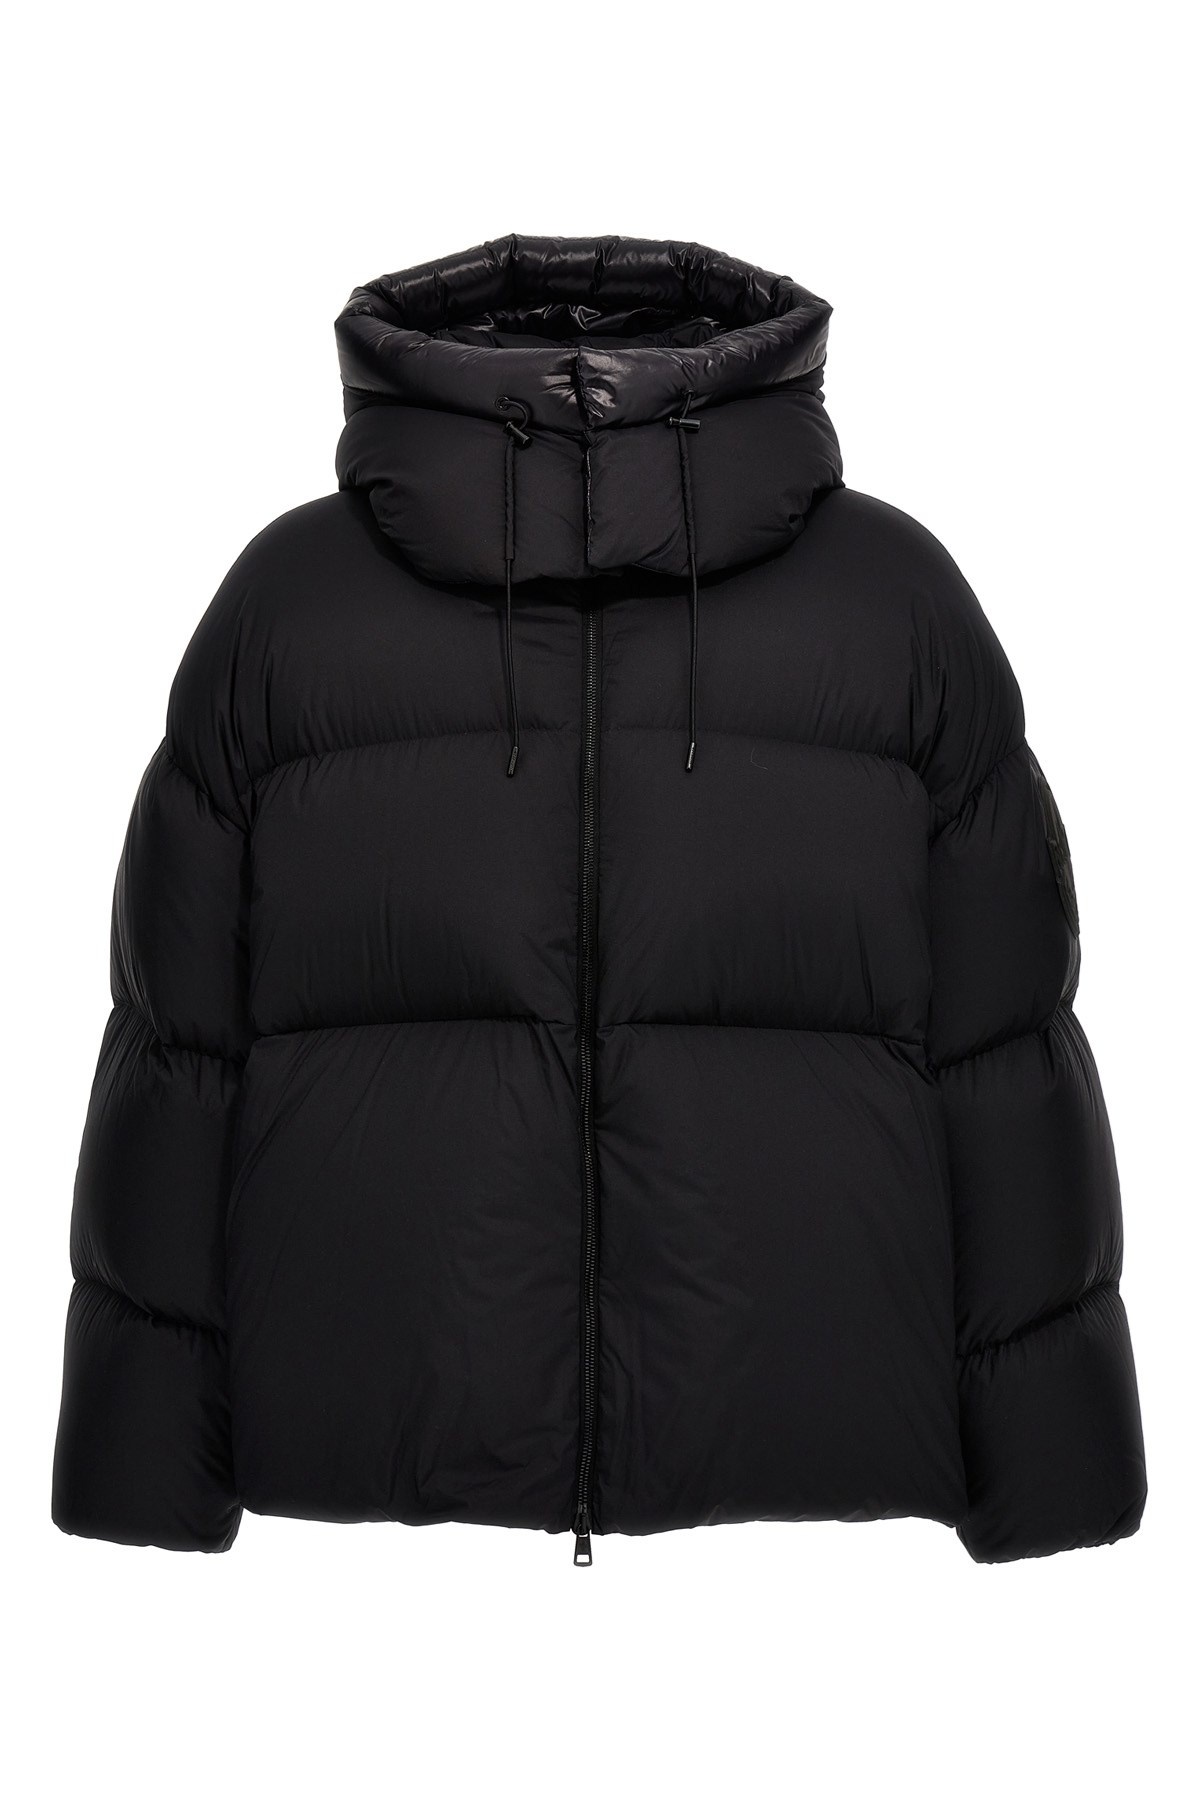 Moncler Genius Roc Nation by Jay-Z down jacket - 1